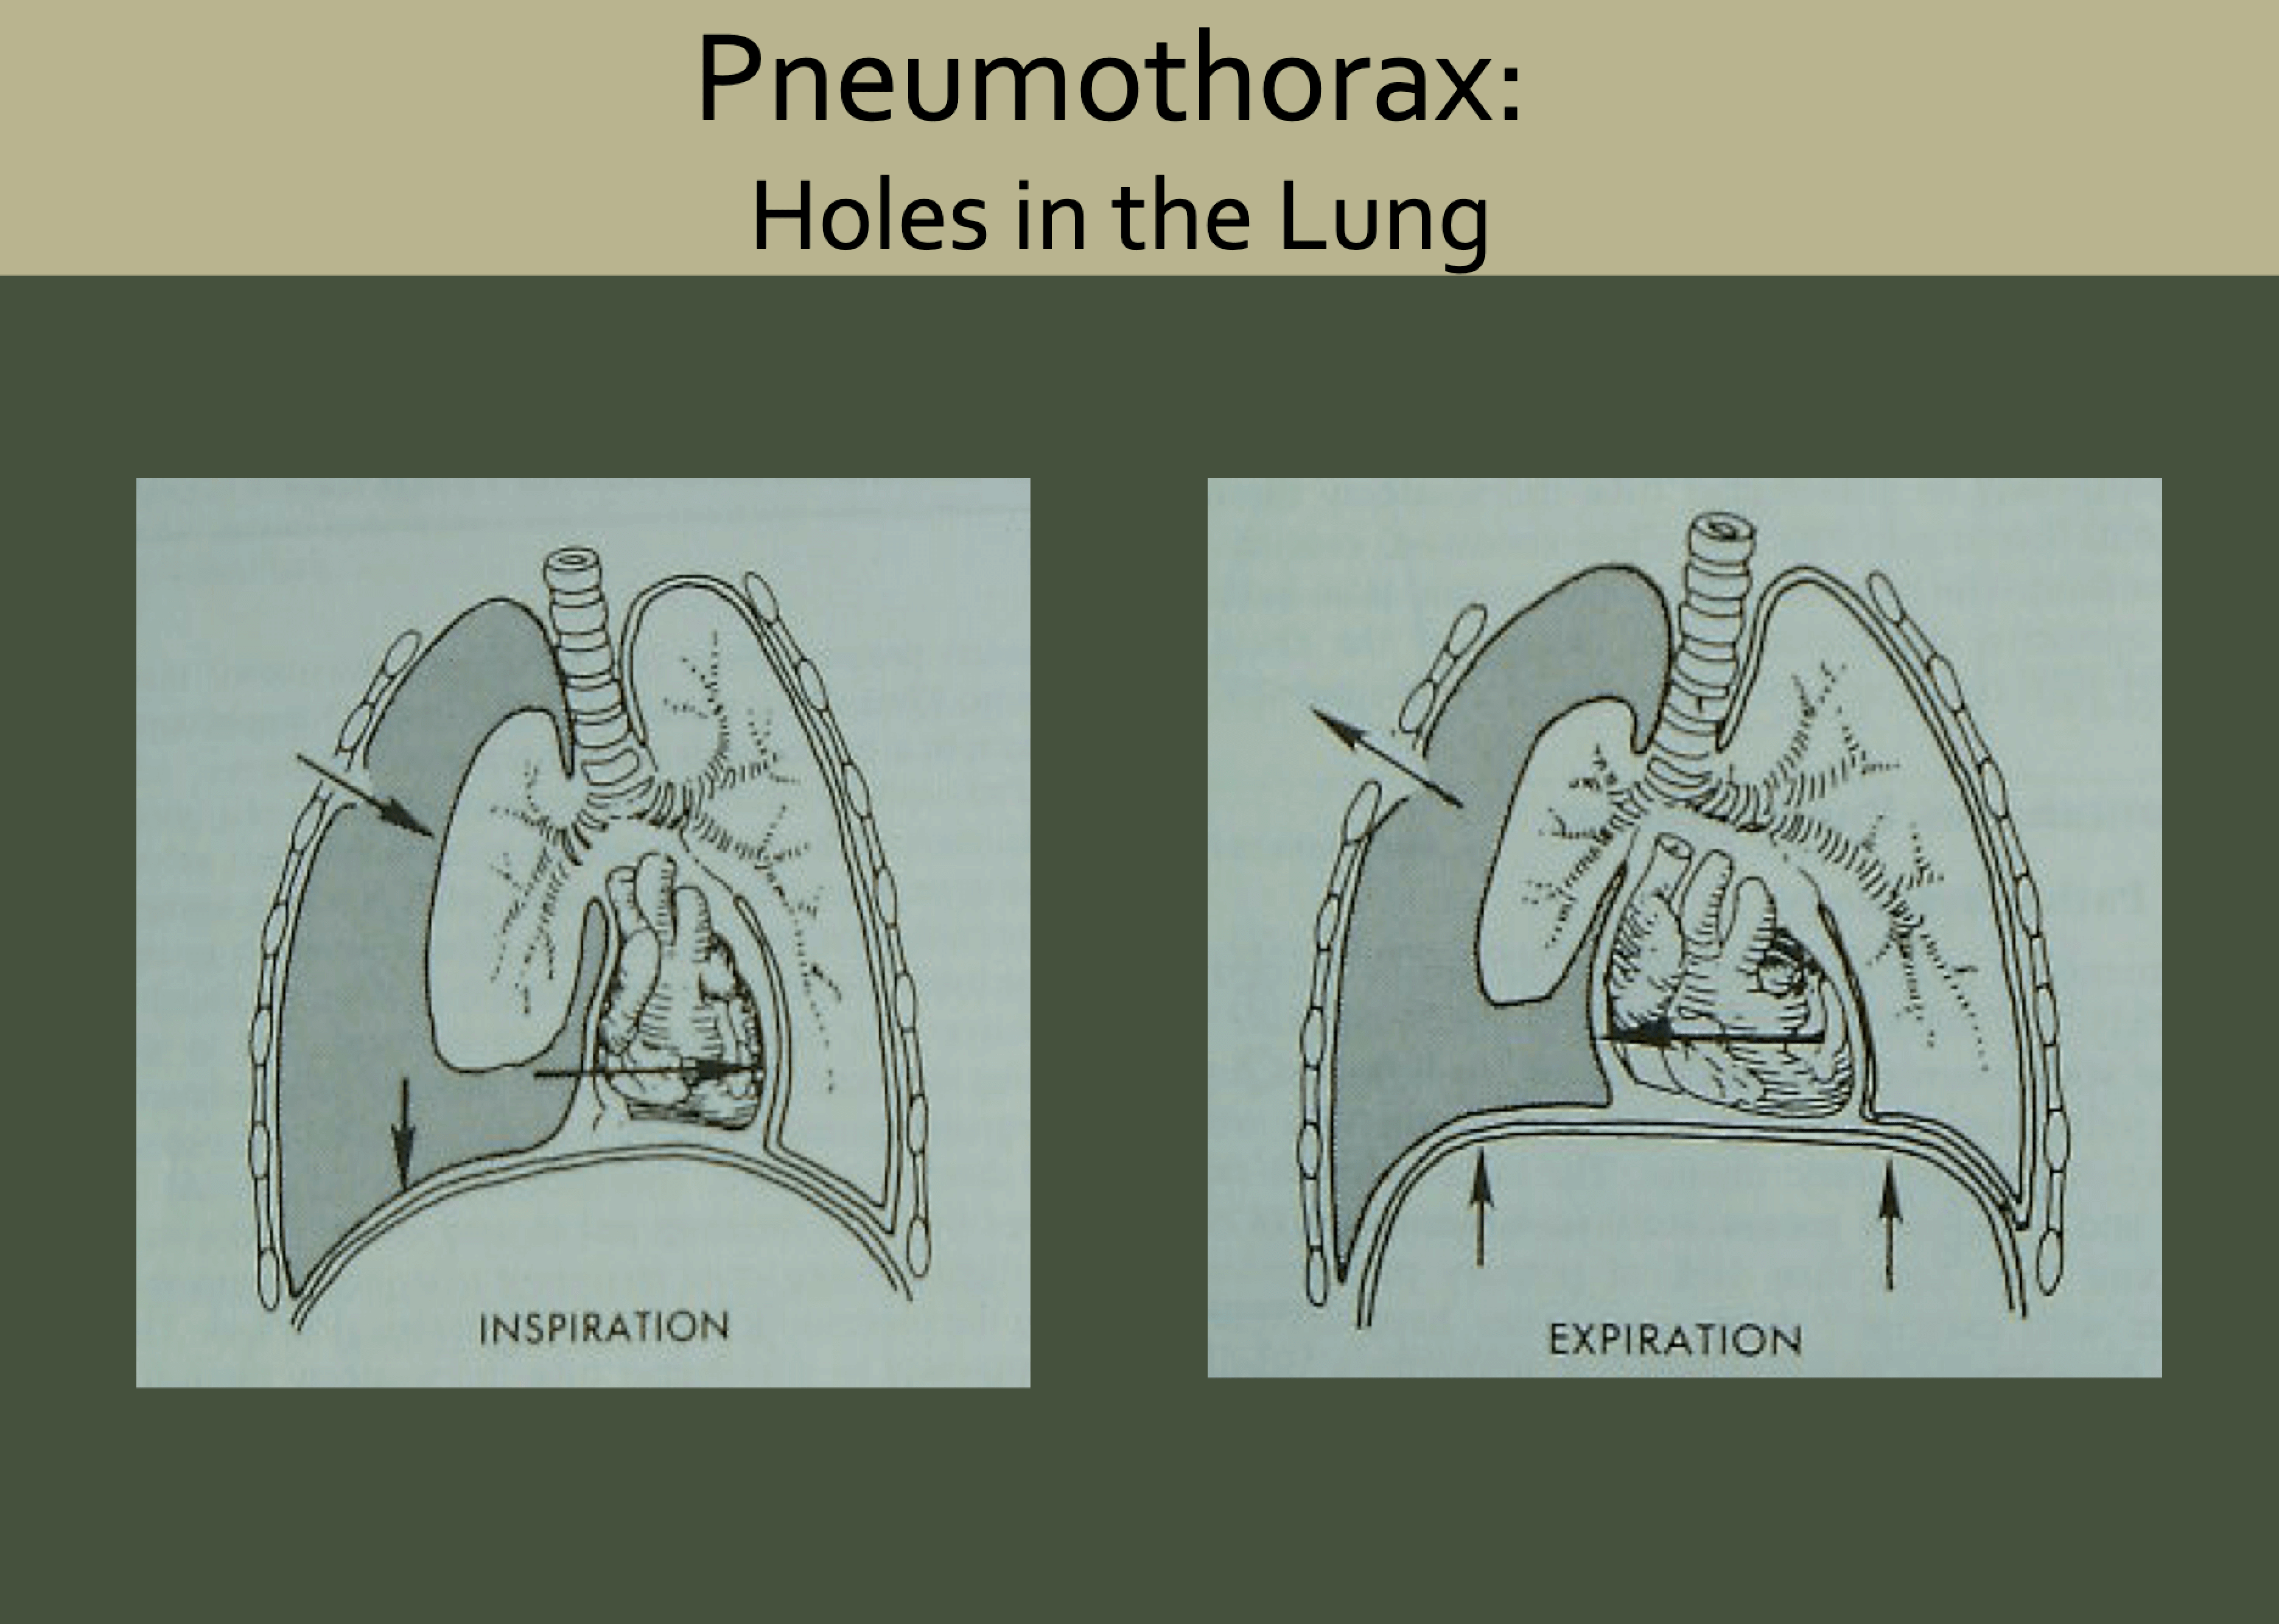 A diagram showing an open pneumothorax showing air going in and out